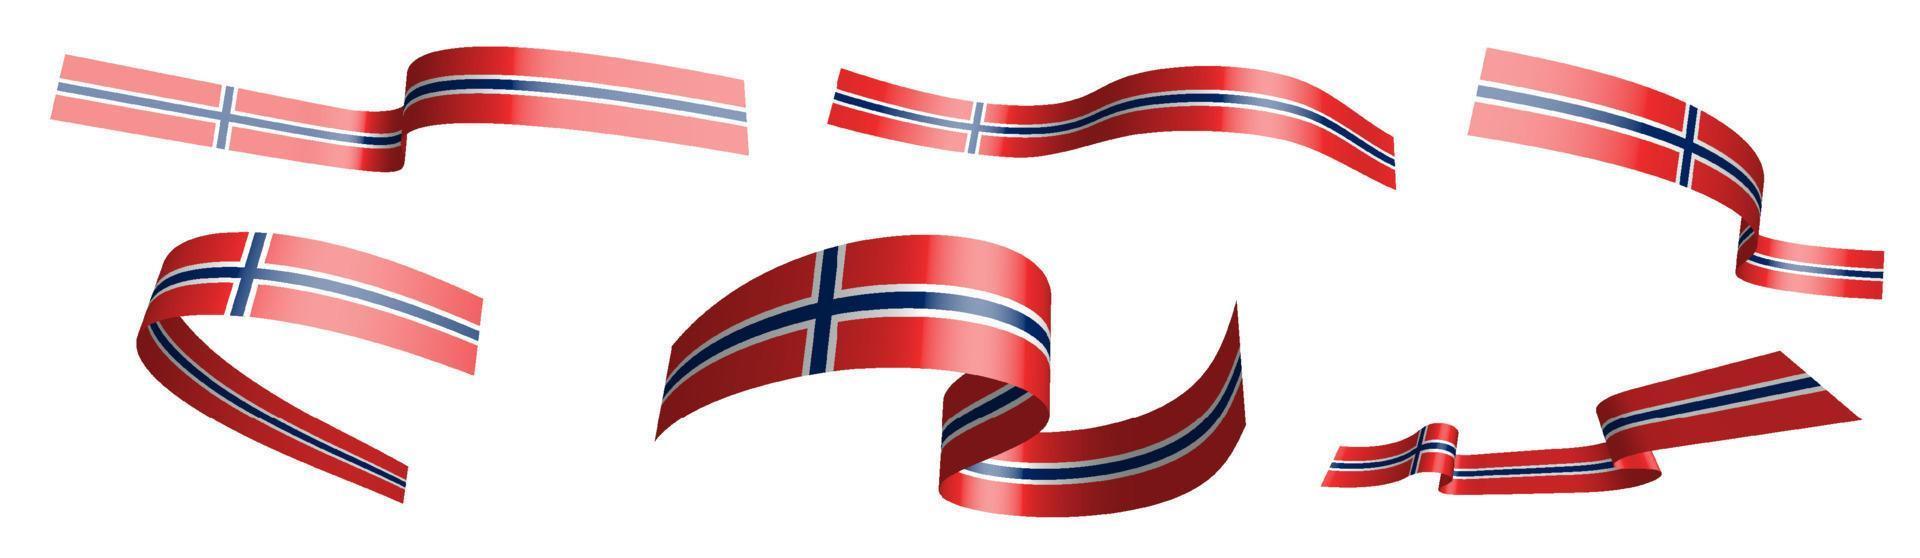 Set of holiday ribbons. Norway flag waving in wind. Separation into lower and upper layers. Design element. Vector on white background